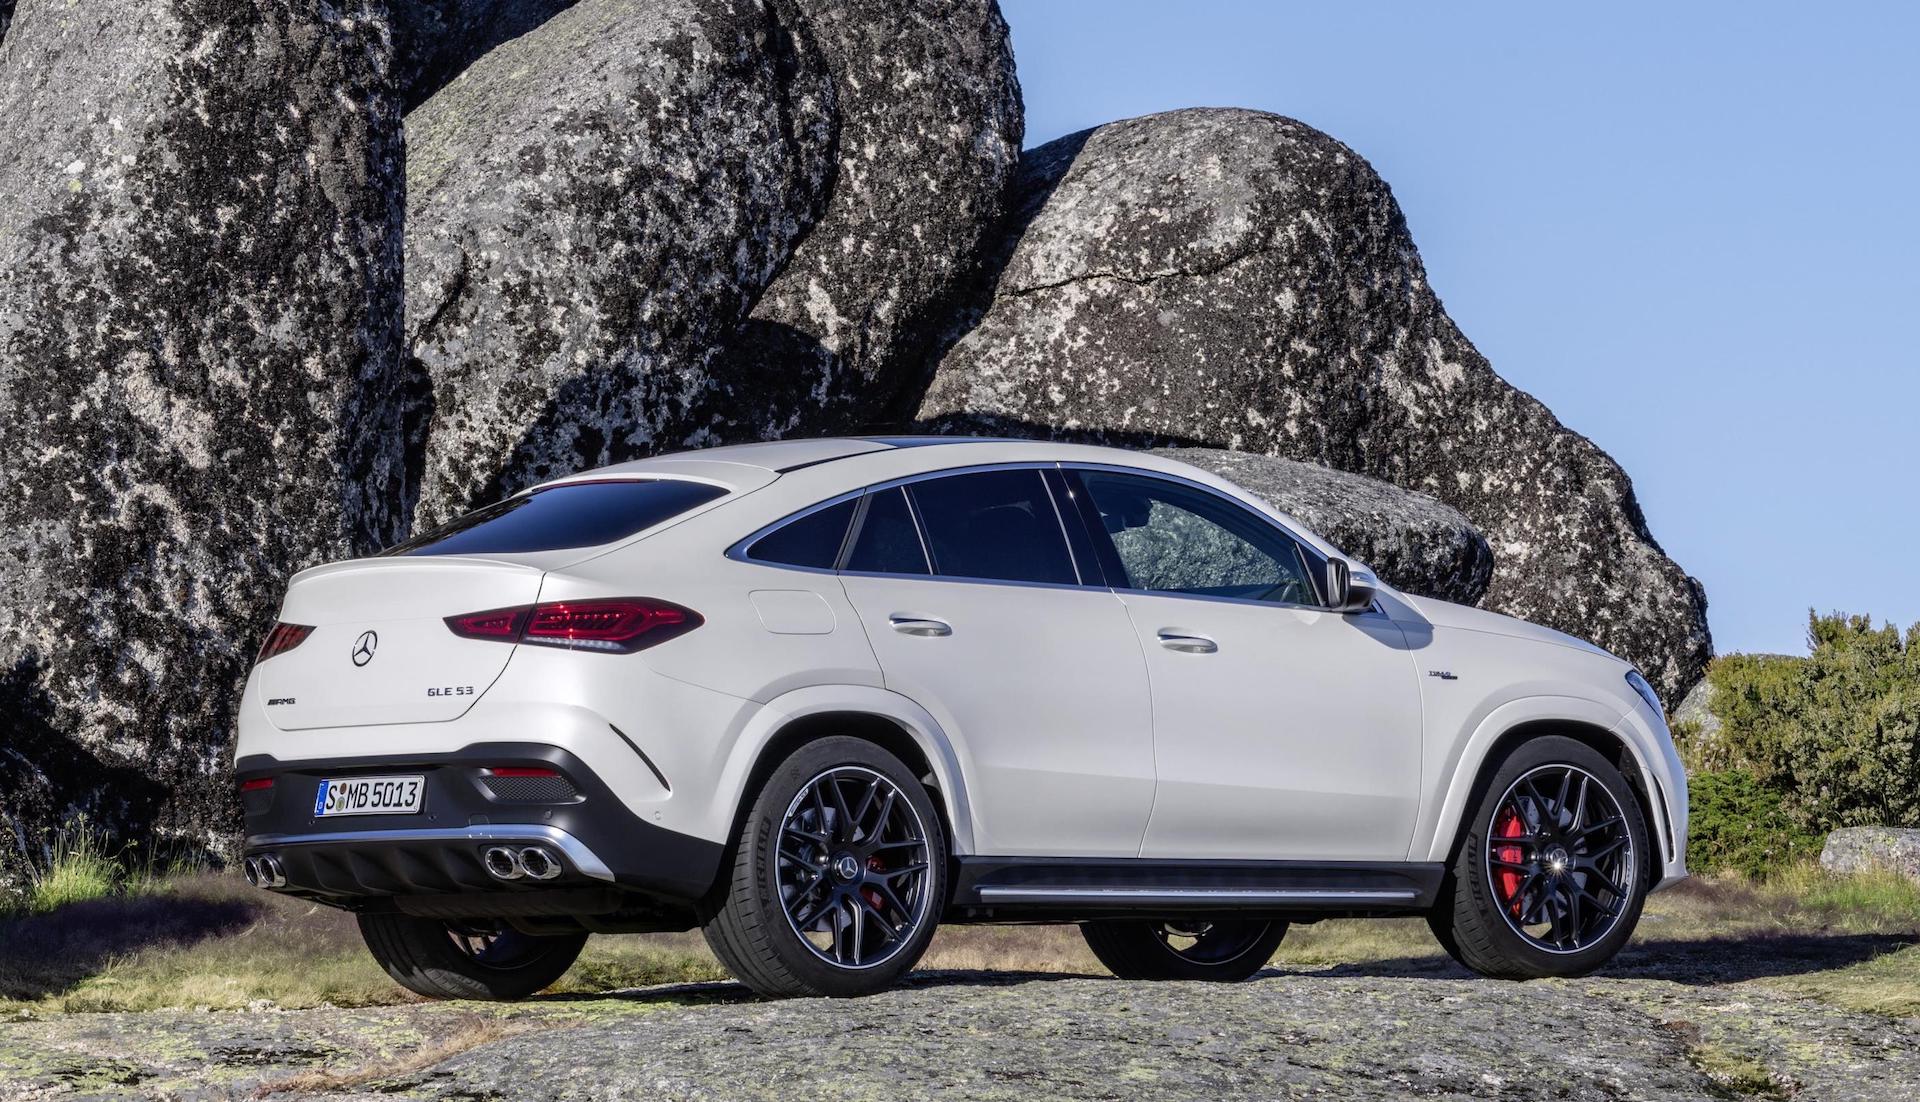 2020 MercedesBenz GLE Coupe unveiled, with AMG 53 PerformanceDrive